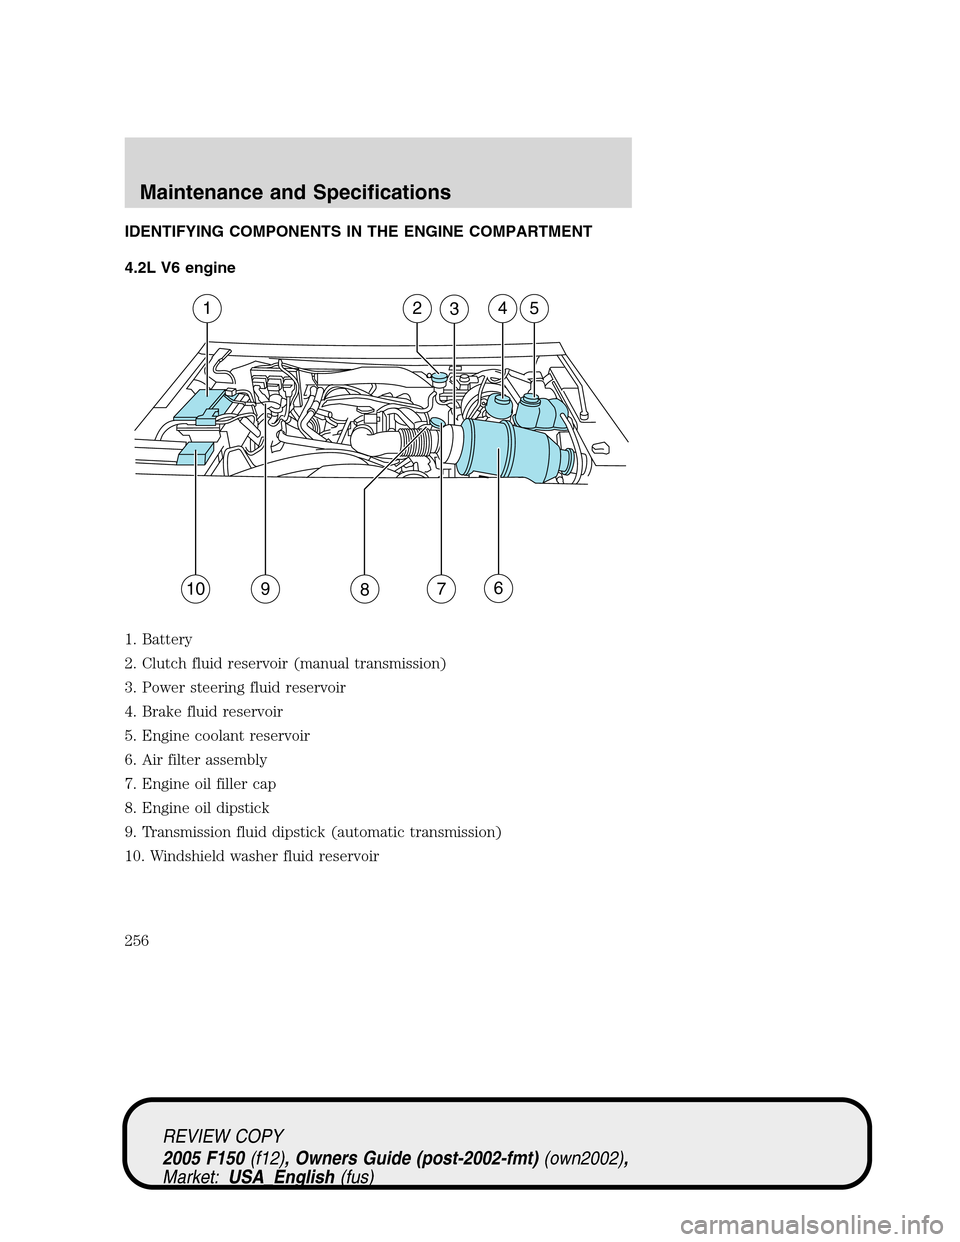 FORD F150 2005 11.G Owners Manual IDENTIFYING COMPONENTS IN THE ENGINE COMPARTMENT
4.2L V6 engine
1. Battery
2. Clutch fluid reservoir (manual transmission)
3. Power steering fluid reservoir
4. Brake fluid reservoir
5. Engine coolant 